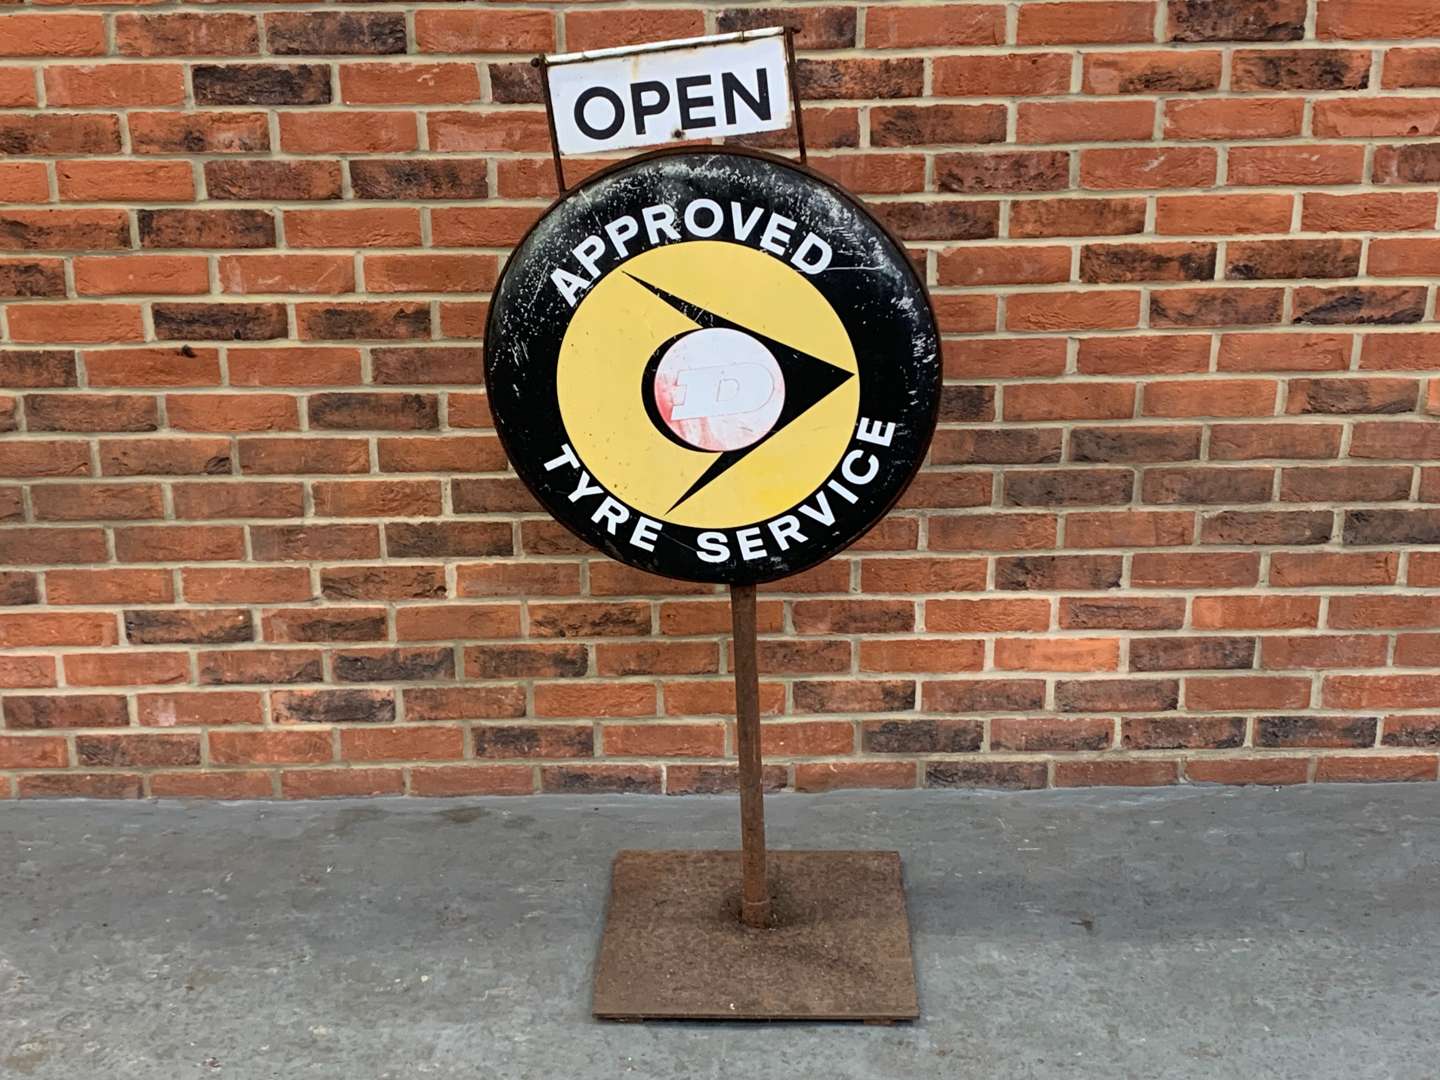 <p>Dunlop Approved Tyre's and Service Forecourt Sign</p>